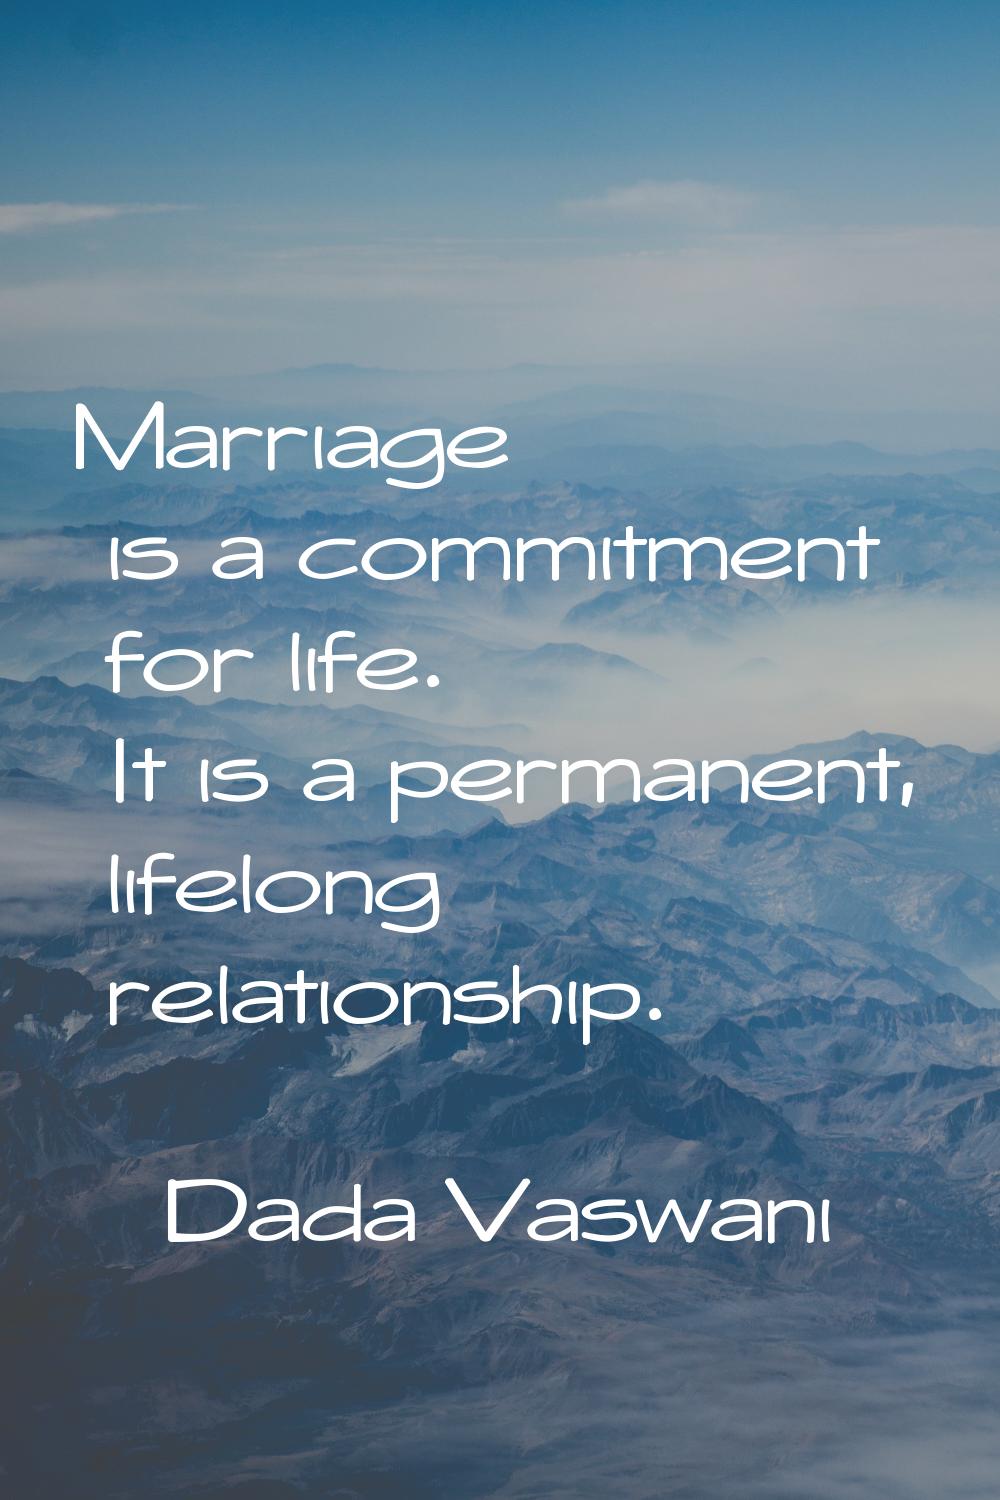 Marriage is a commitment for life. It is a permanent, lifelong relationship.